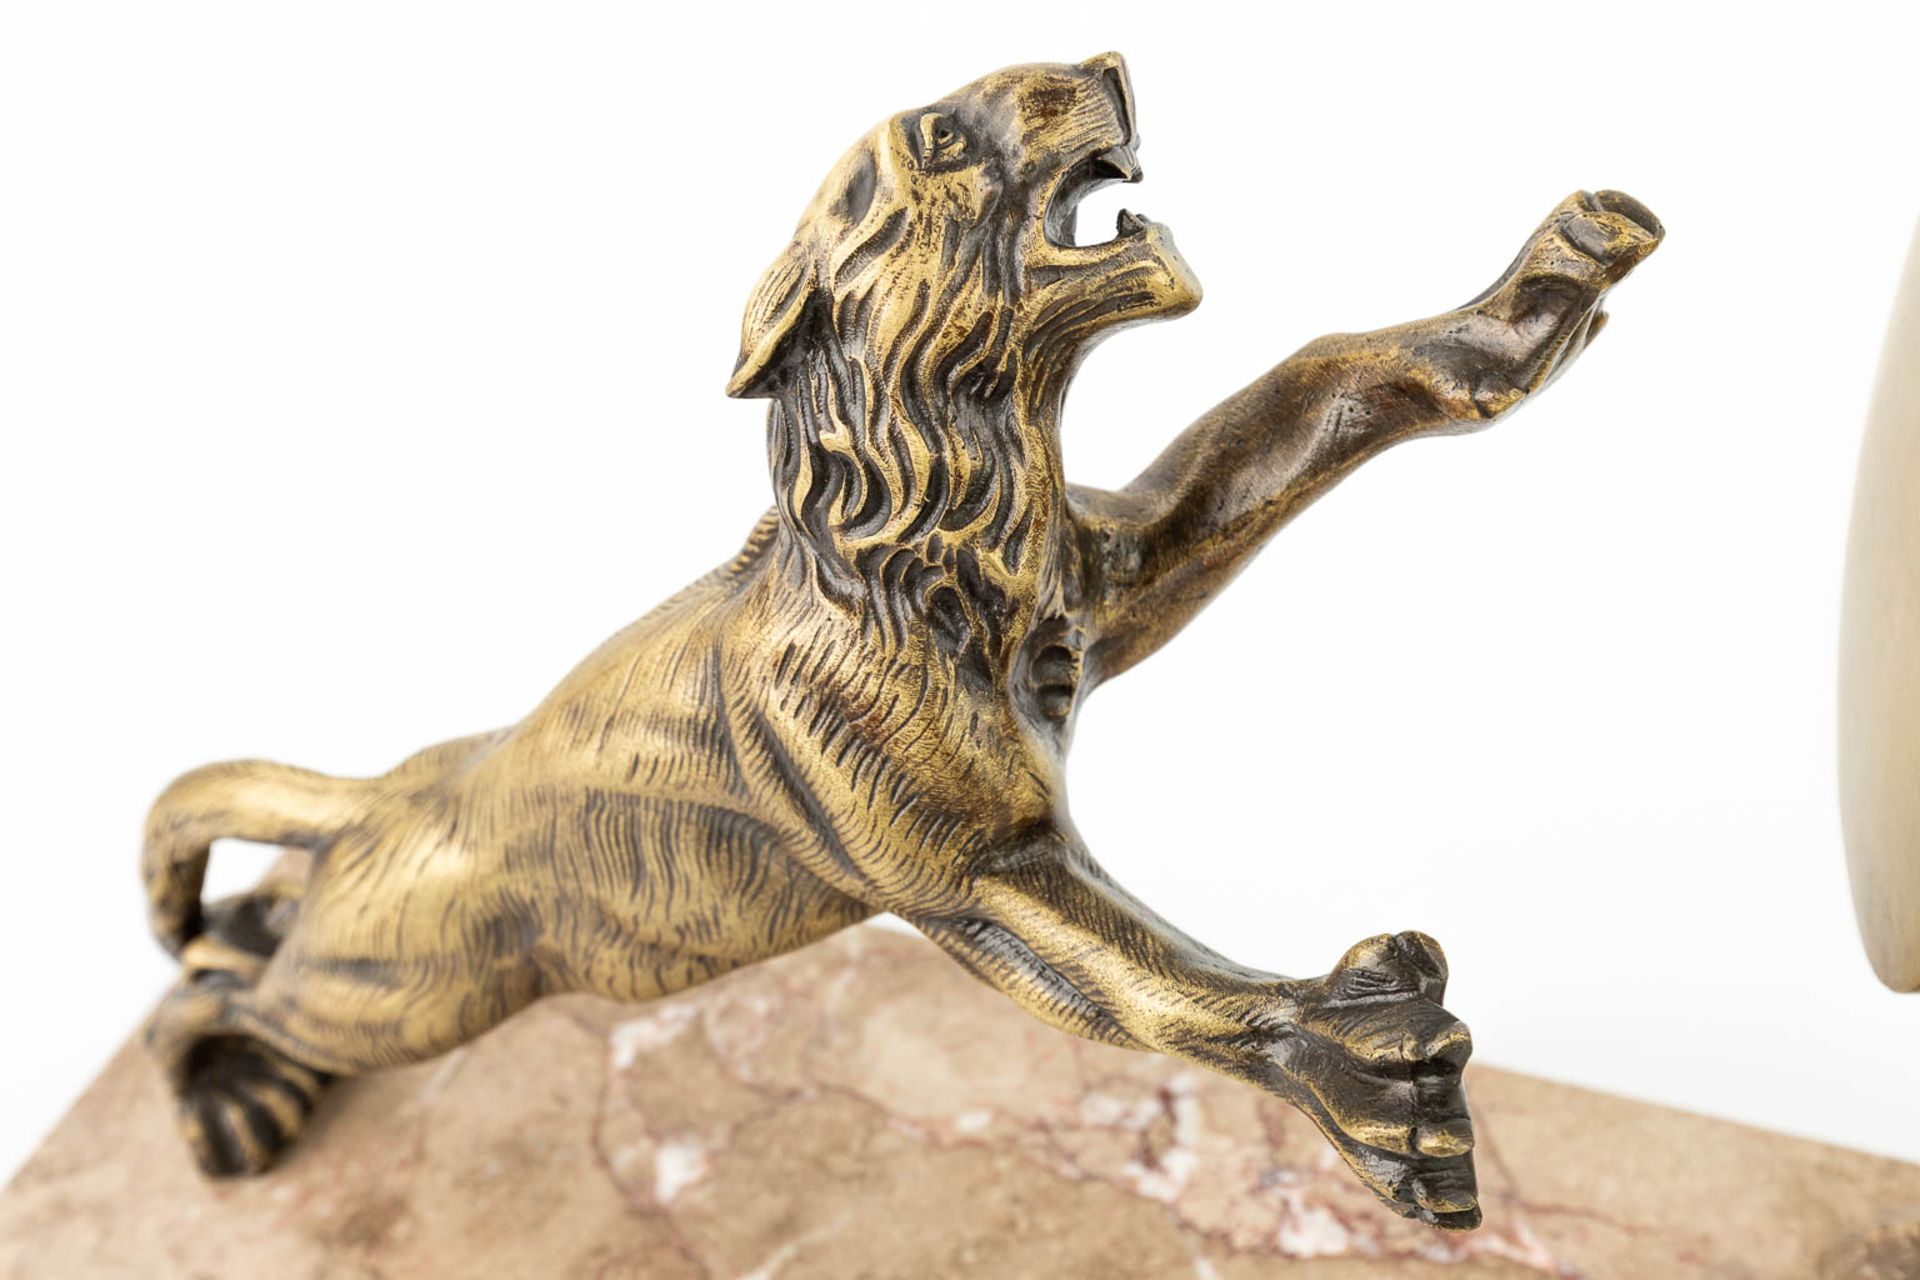 R. TUBACK (XIX-XX) 'Hunter with lion' an art deco statue made of bronze and mounted on a marble base - Image 7 of 11